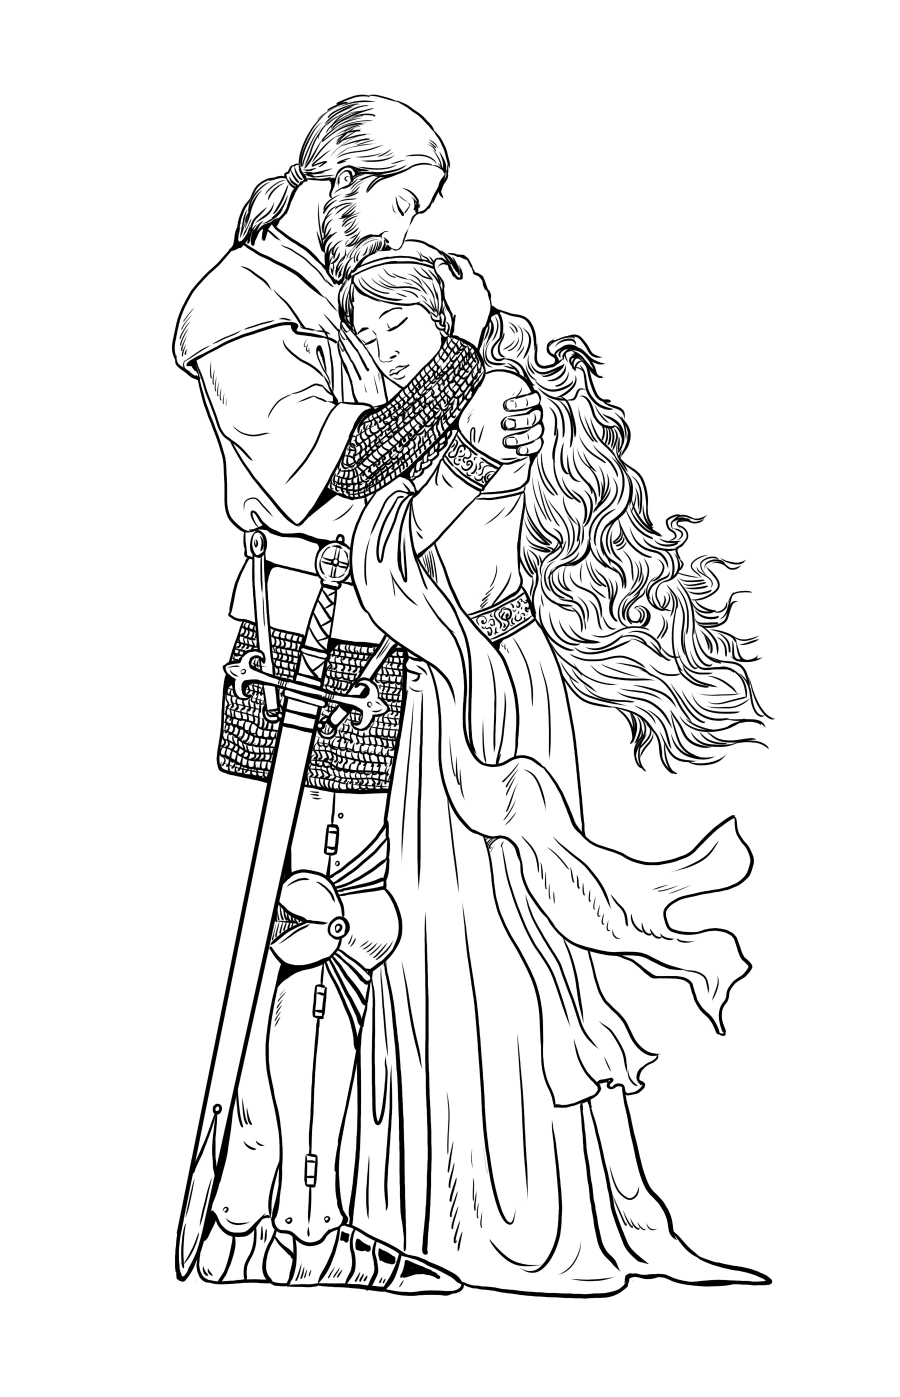 Draw Knight and his queen. Love of Tristan and Isolde